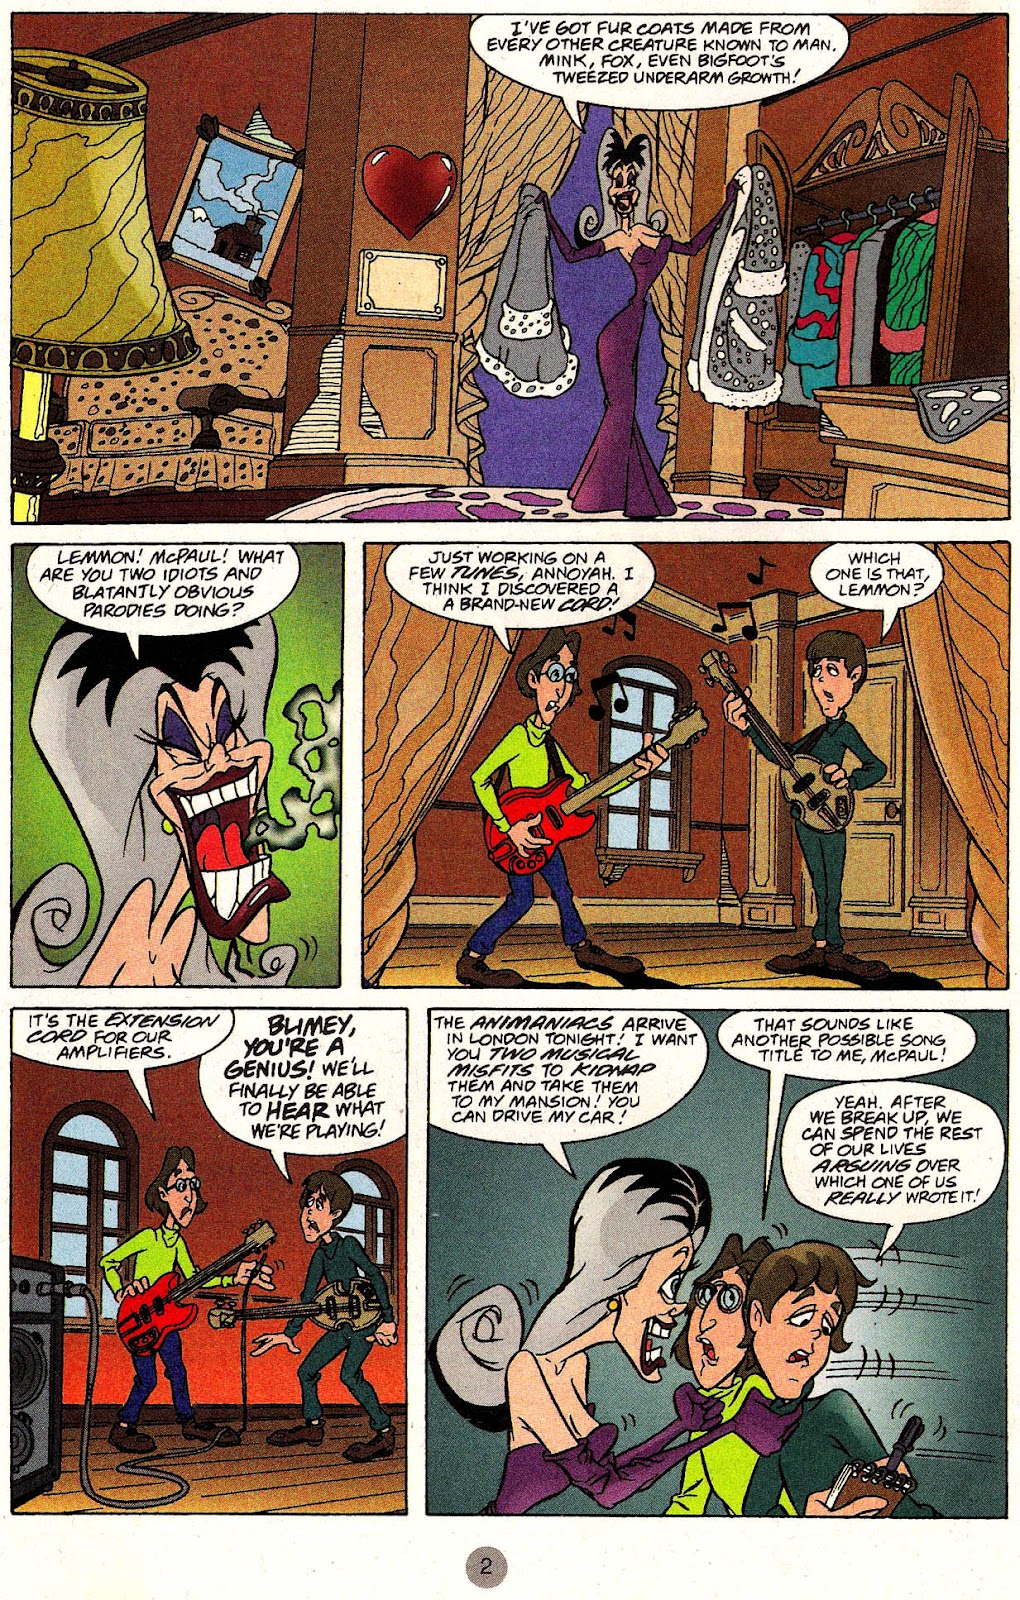 Animaniacs 31 | Read Animaniacs 31 comic online in high quality. Read Full  Comic online for free - Read comics online in high quality .| READ COMIC  ONLINE